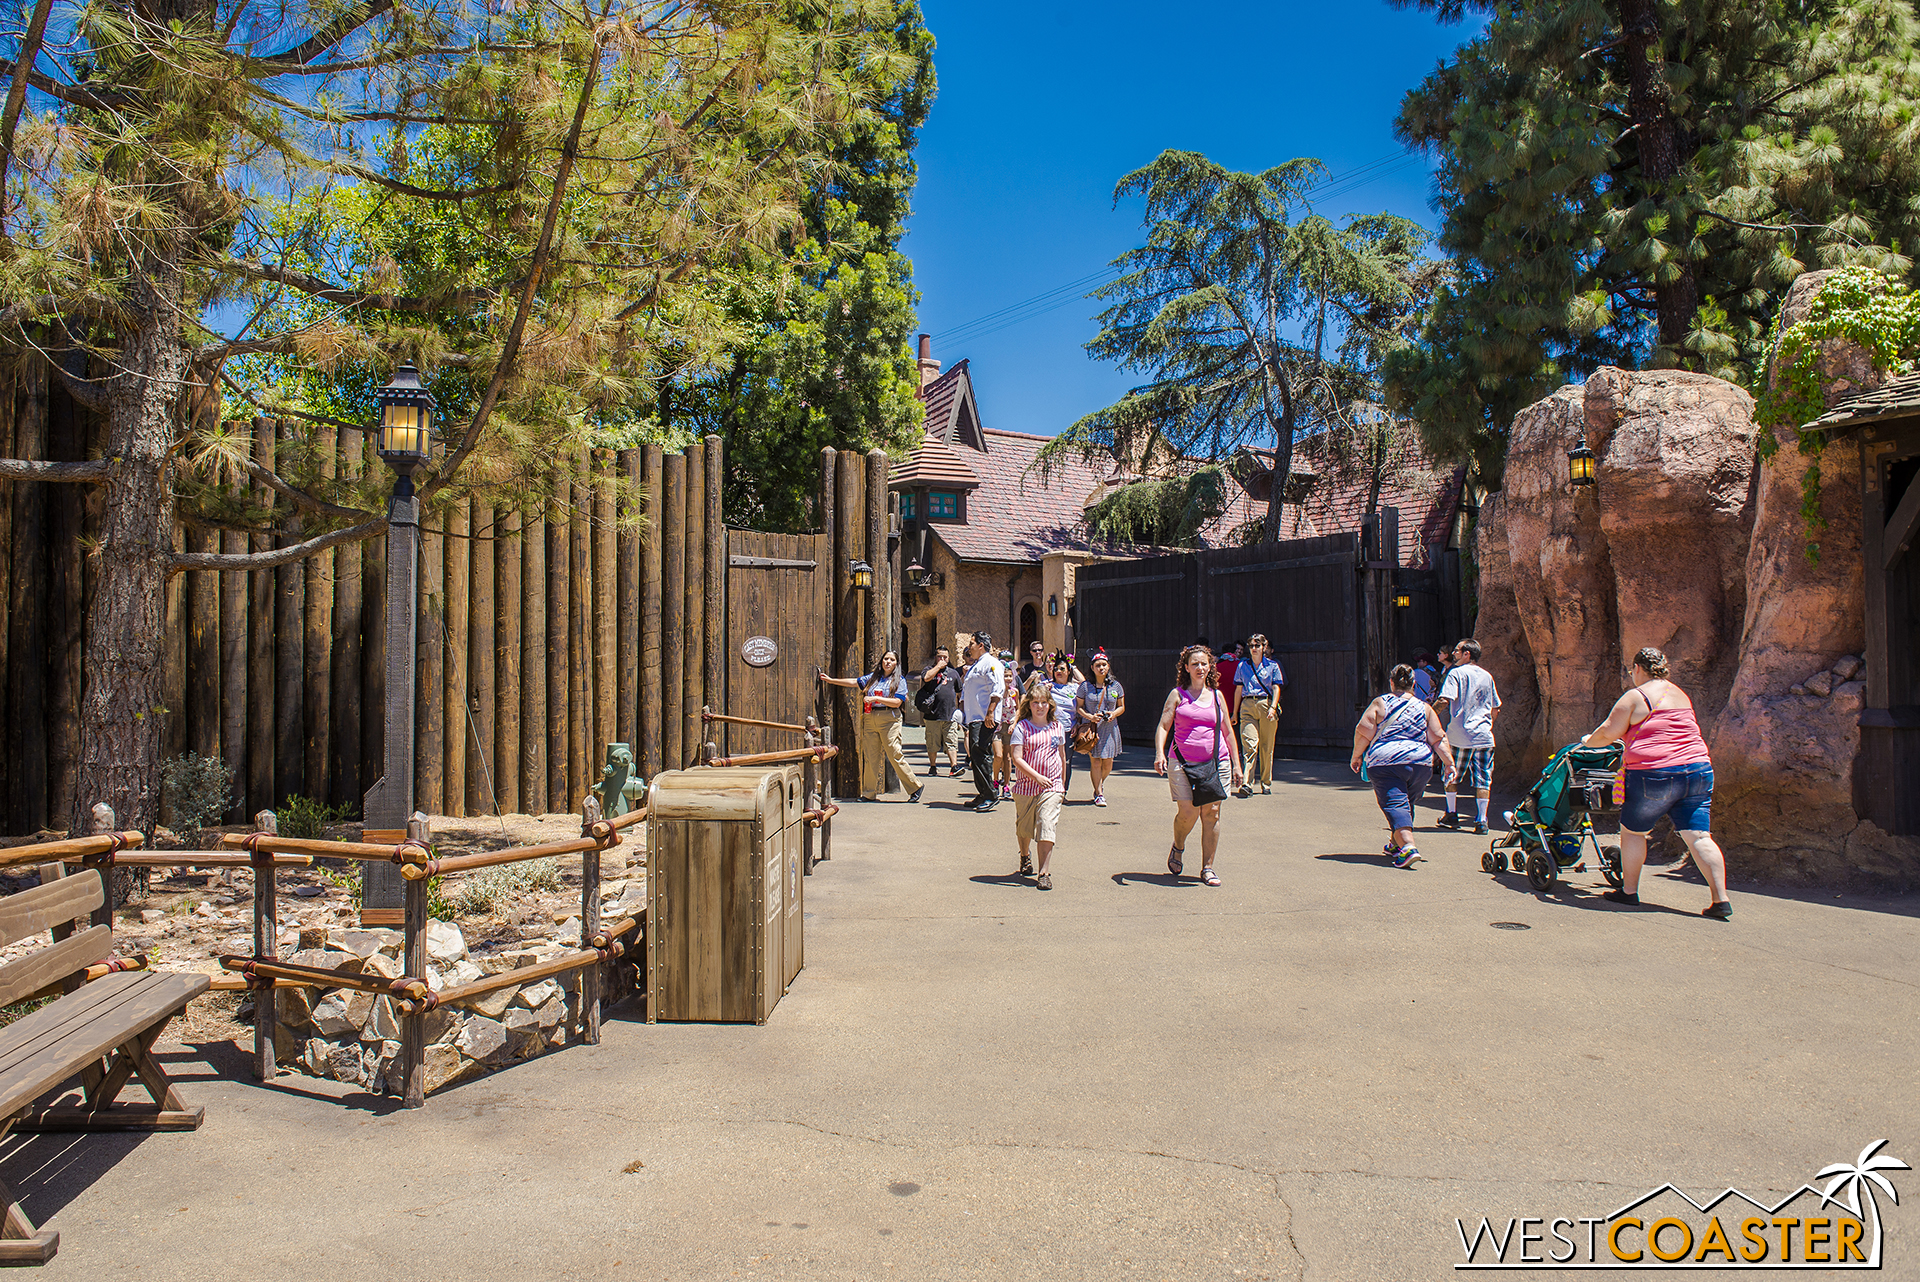  And since Fantasyland doesn't actually start till after the gates, I guess I shouldn't actually say "Frontierland" and "Fantasyland" entries into "Star Wars" Land.&nbsp; The main entrances are both technically from Frontierland. 